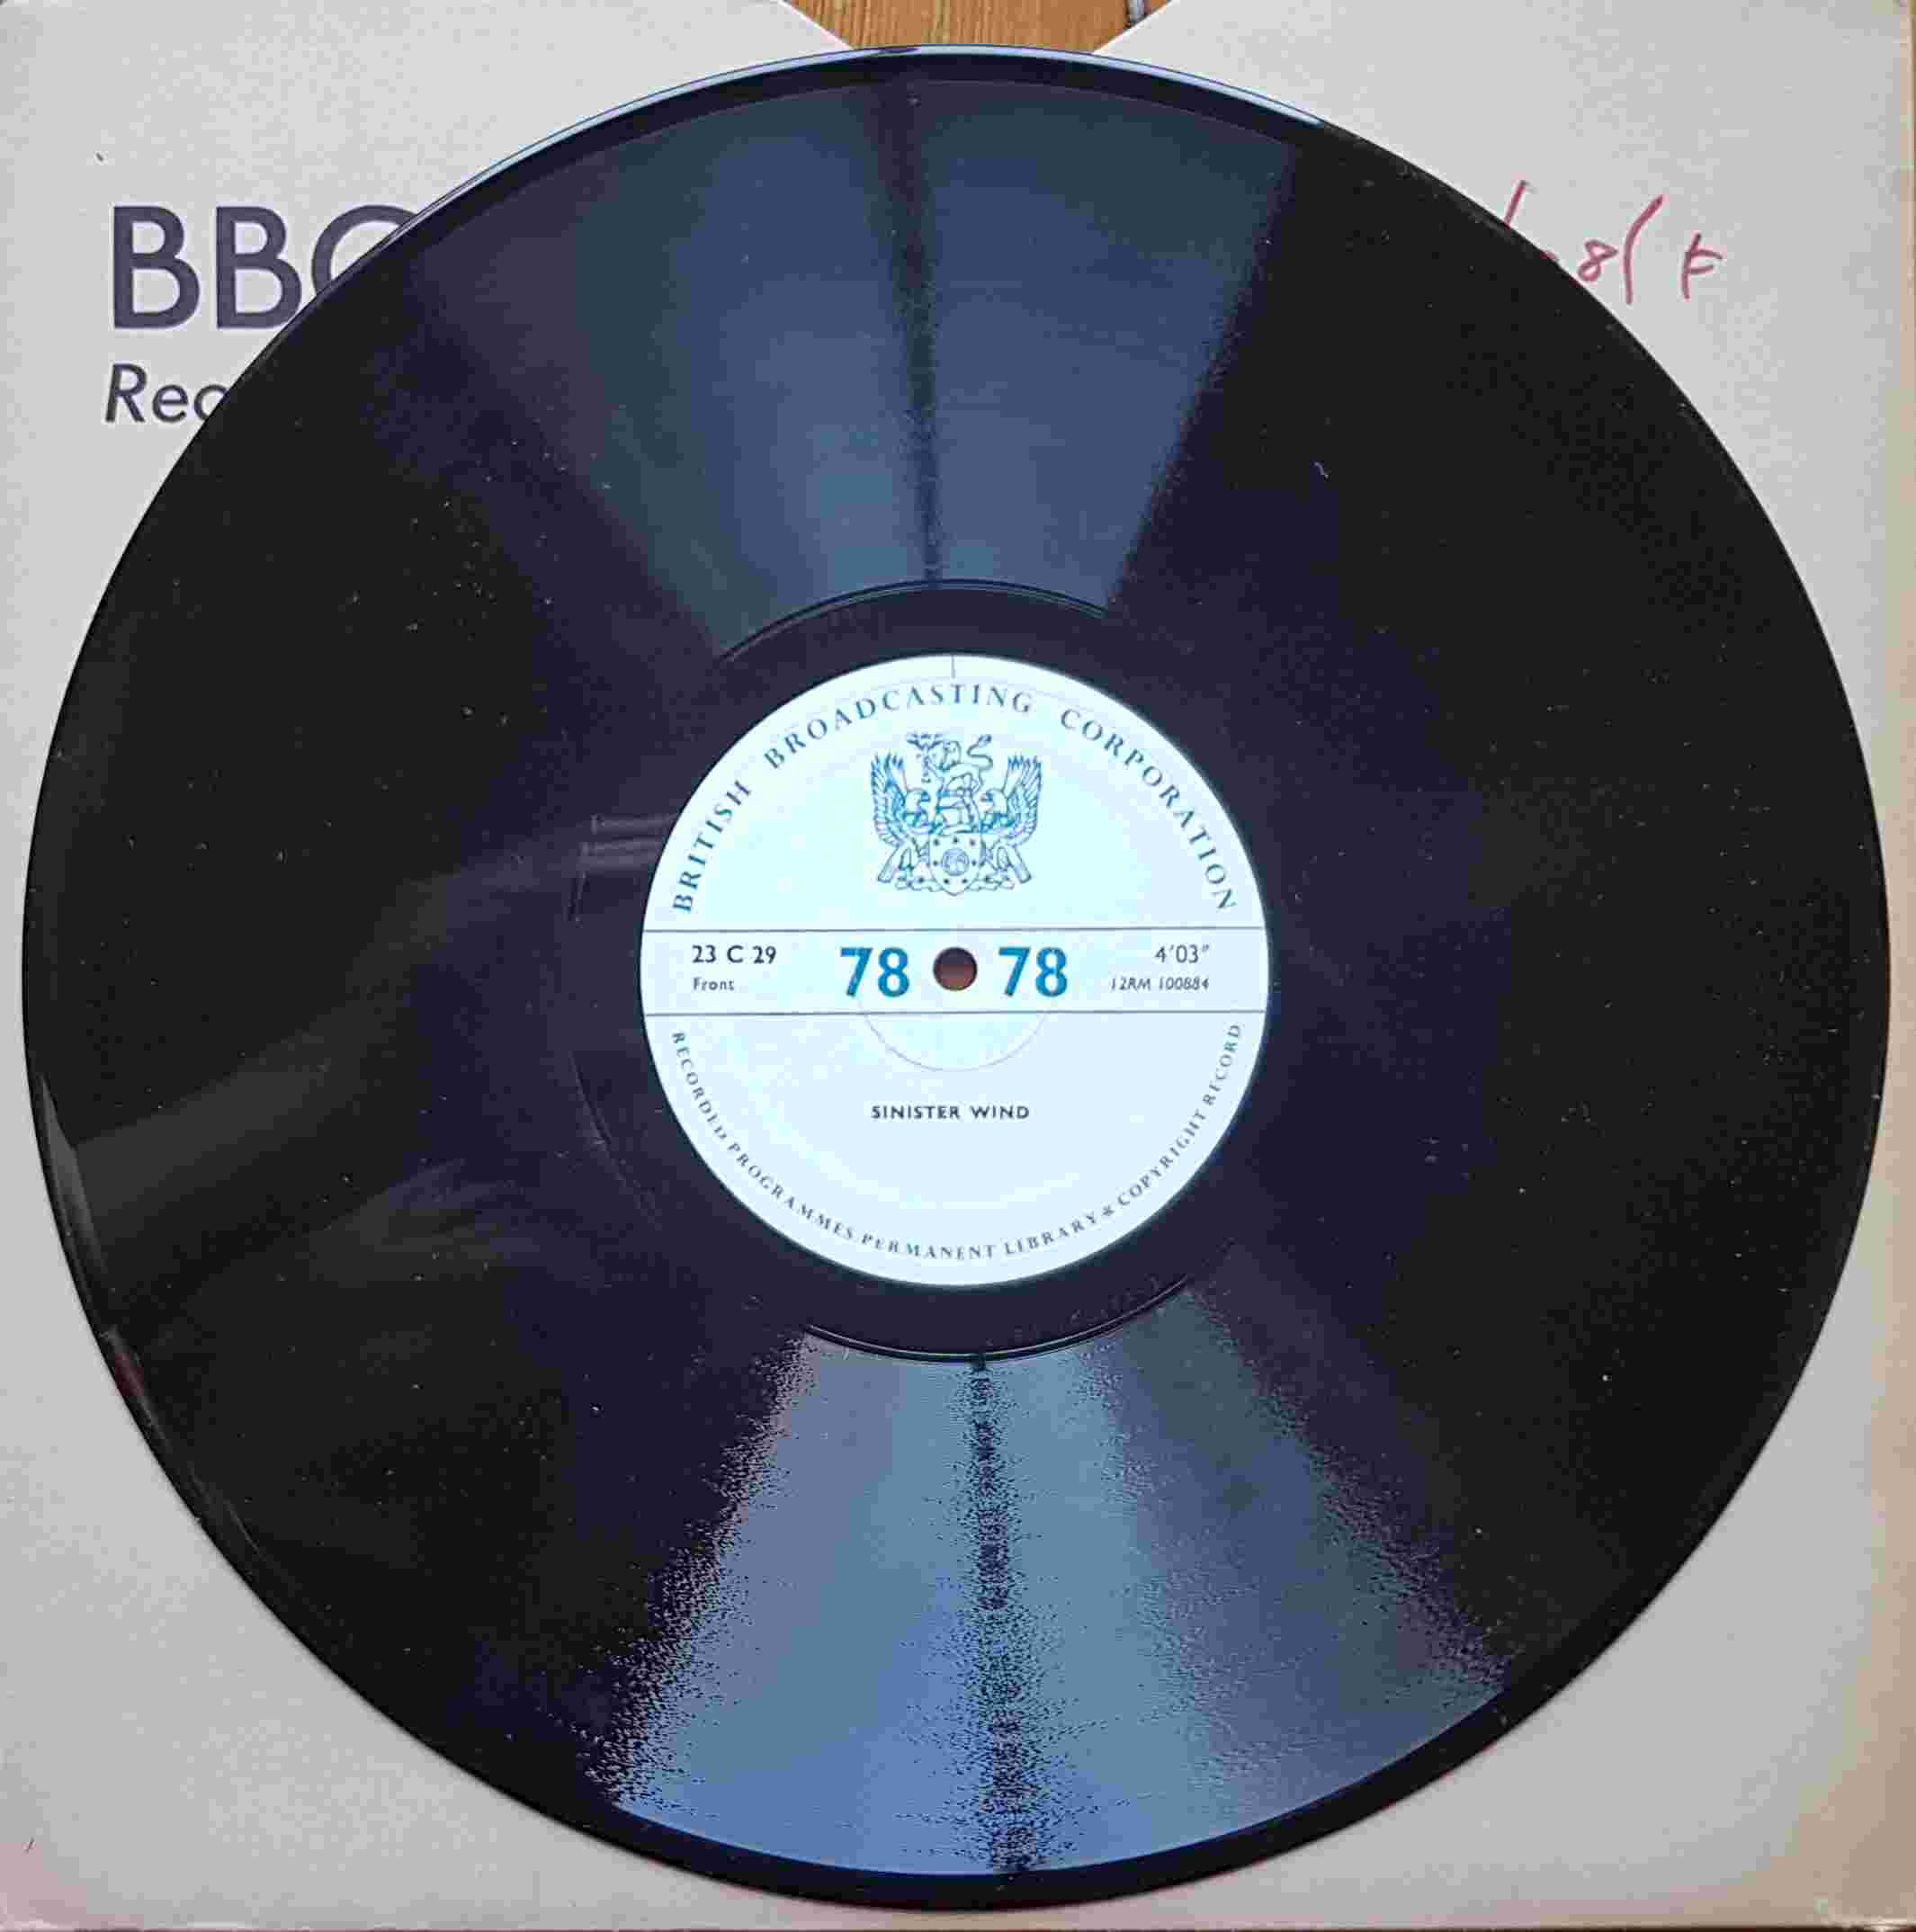 Picture of 23 C 29 Wind by artist Not registered from the BBC records and Tapes library